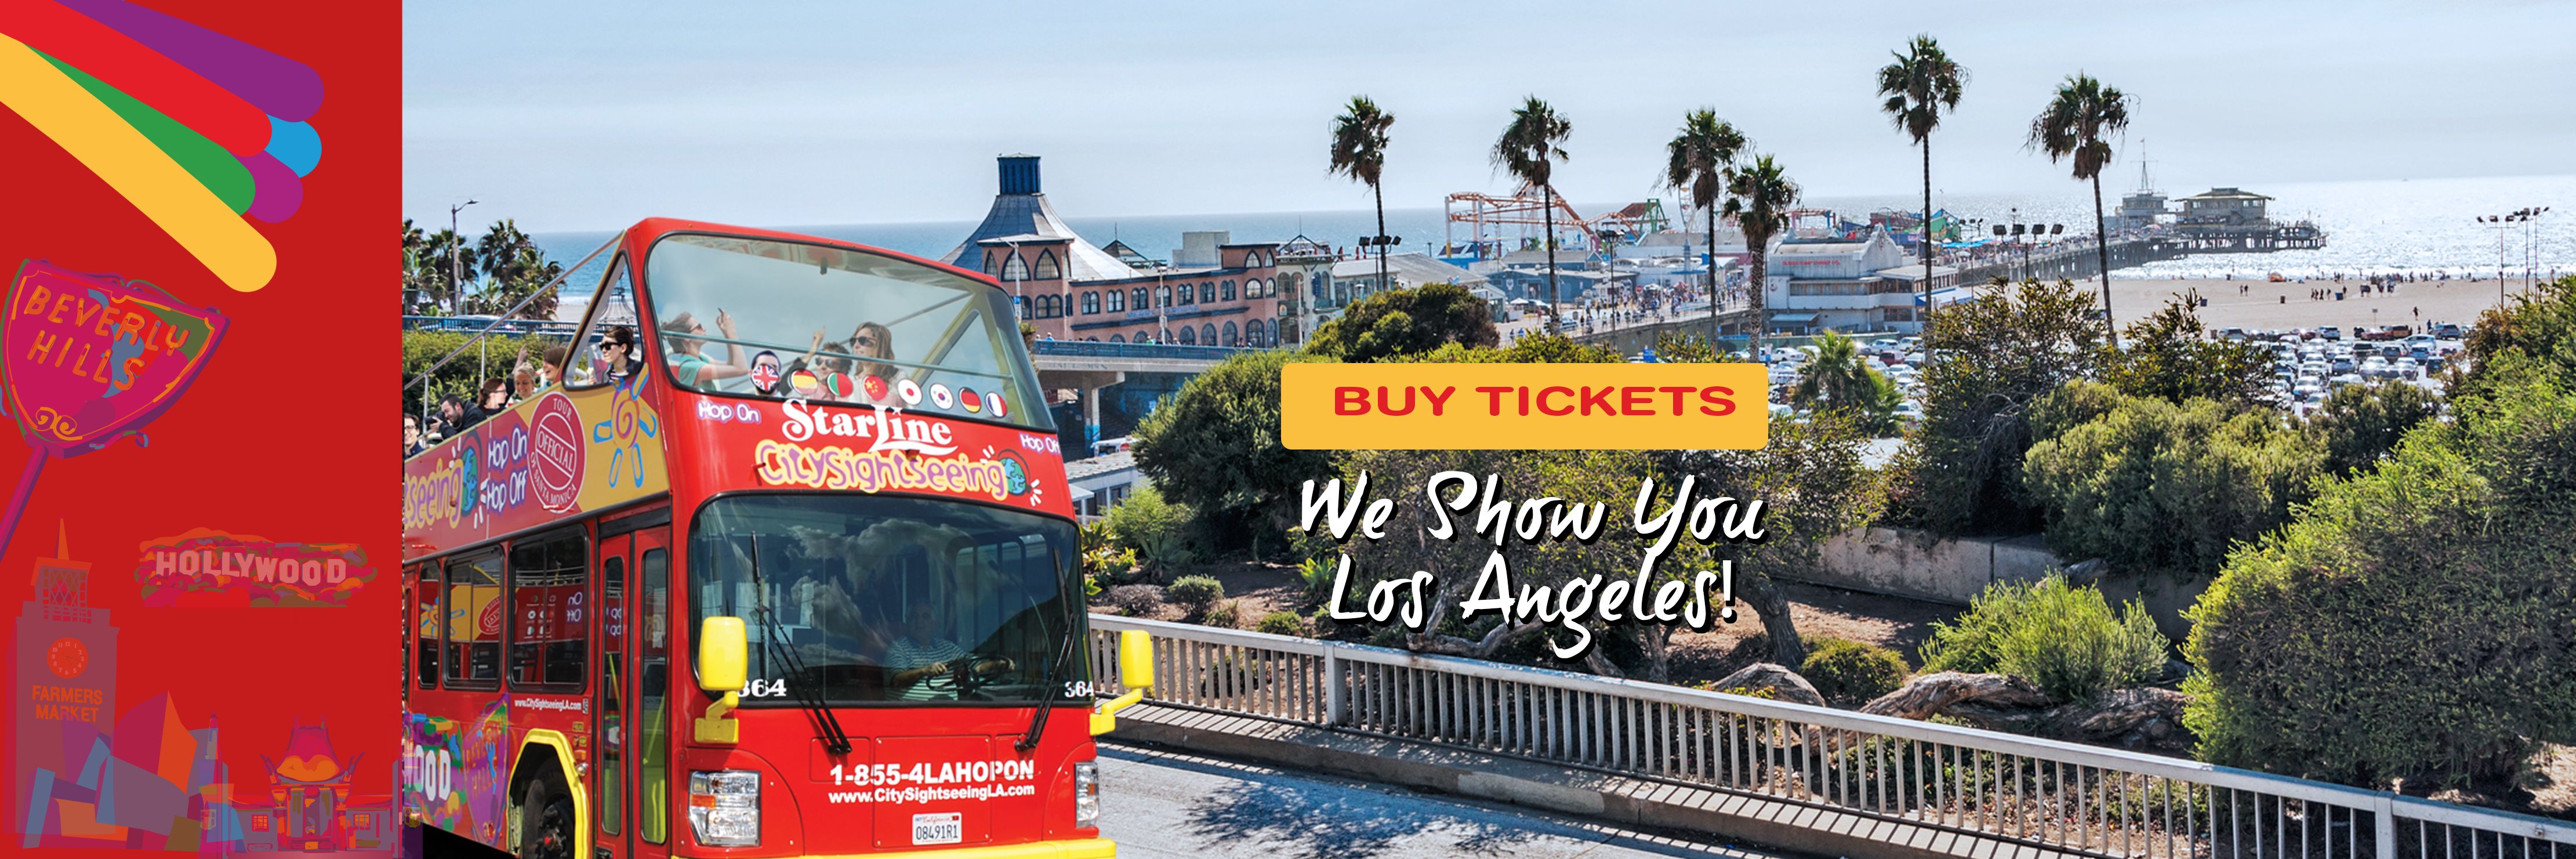 grayline bus tours hollywood